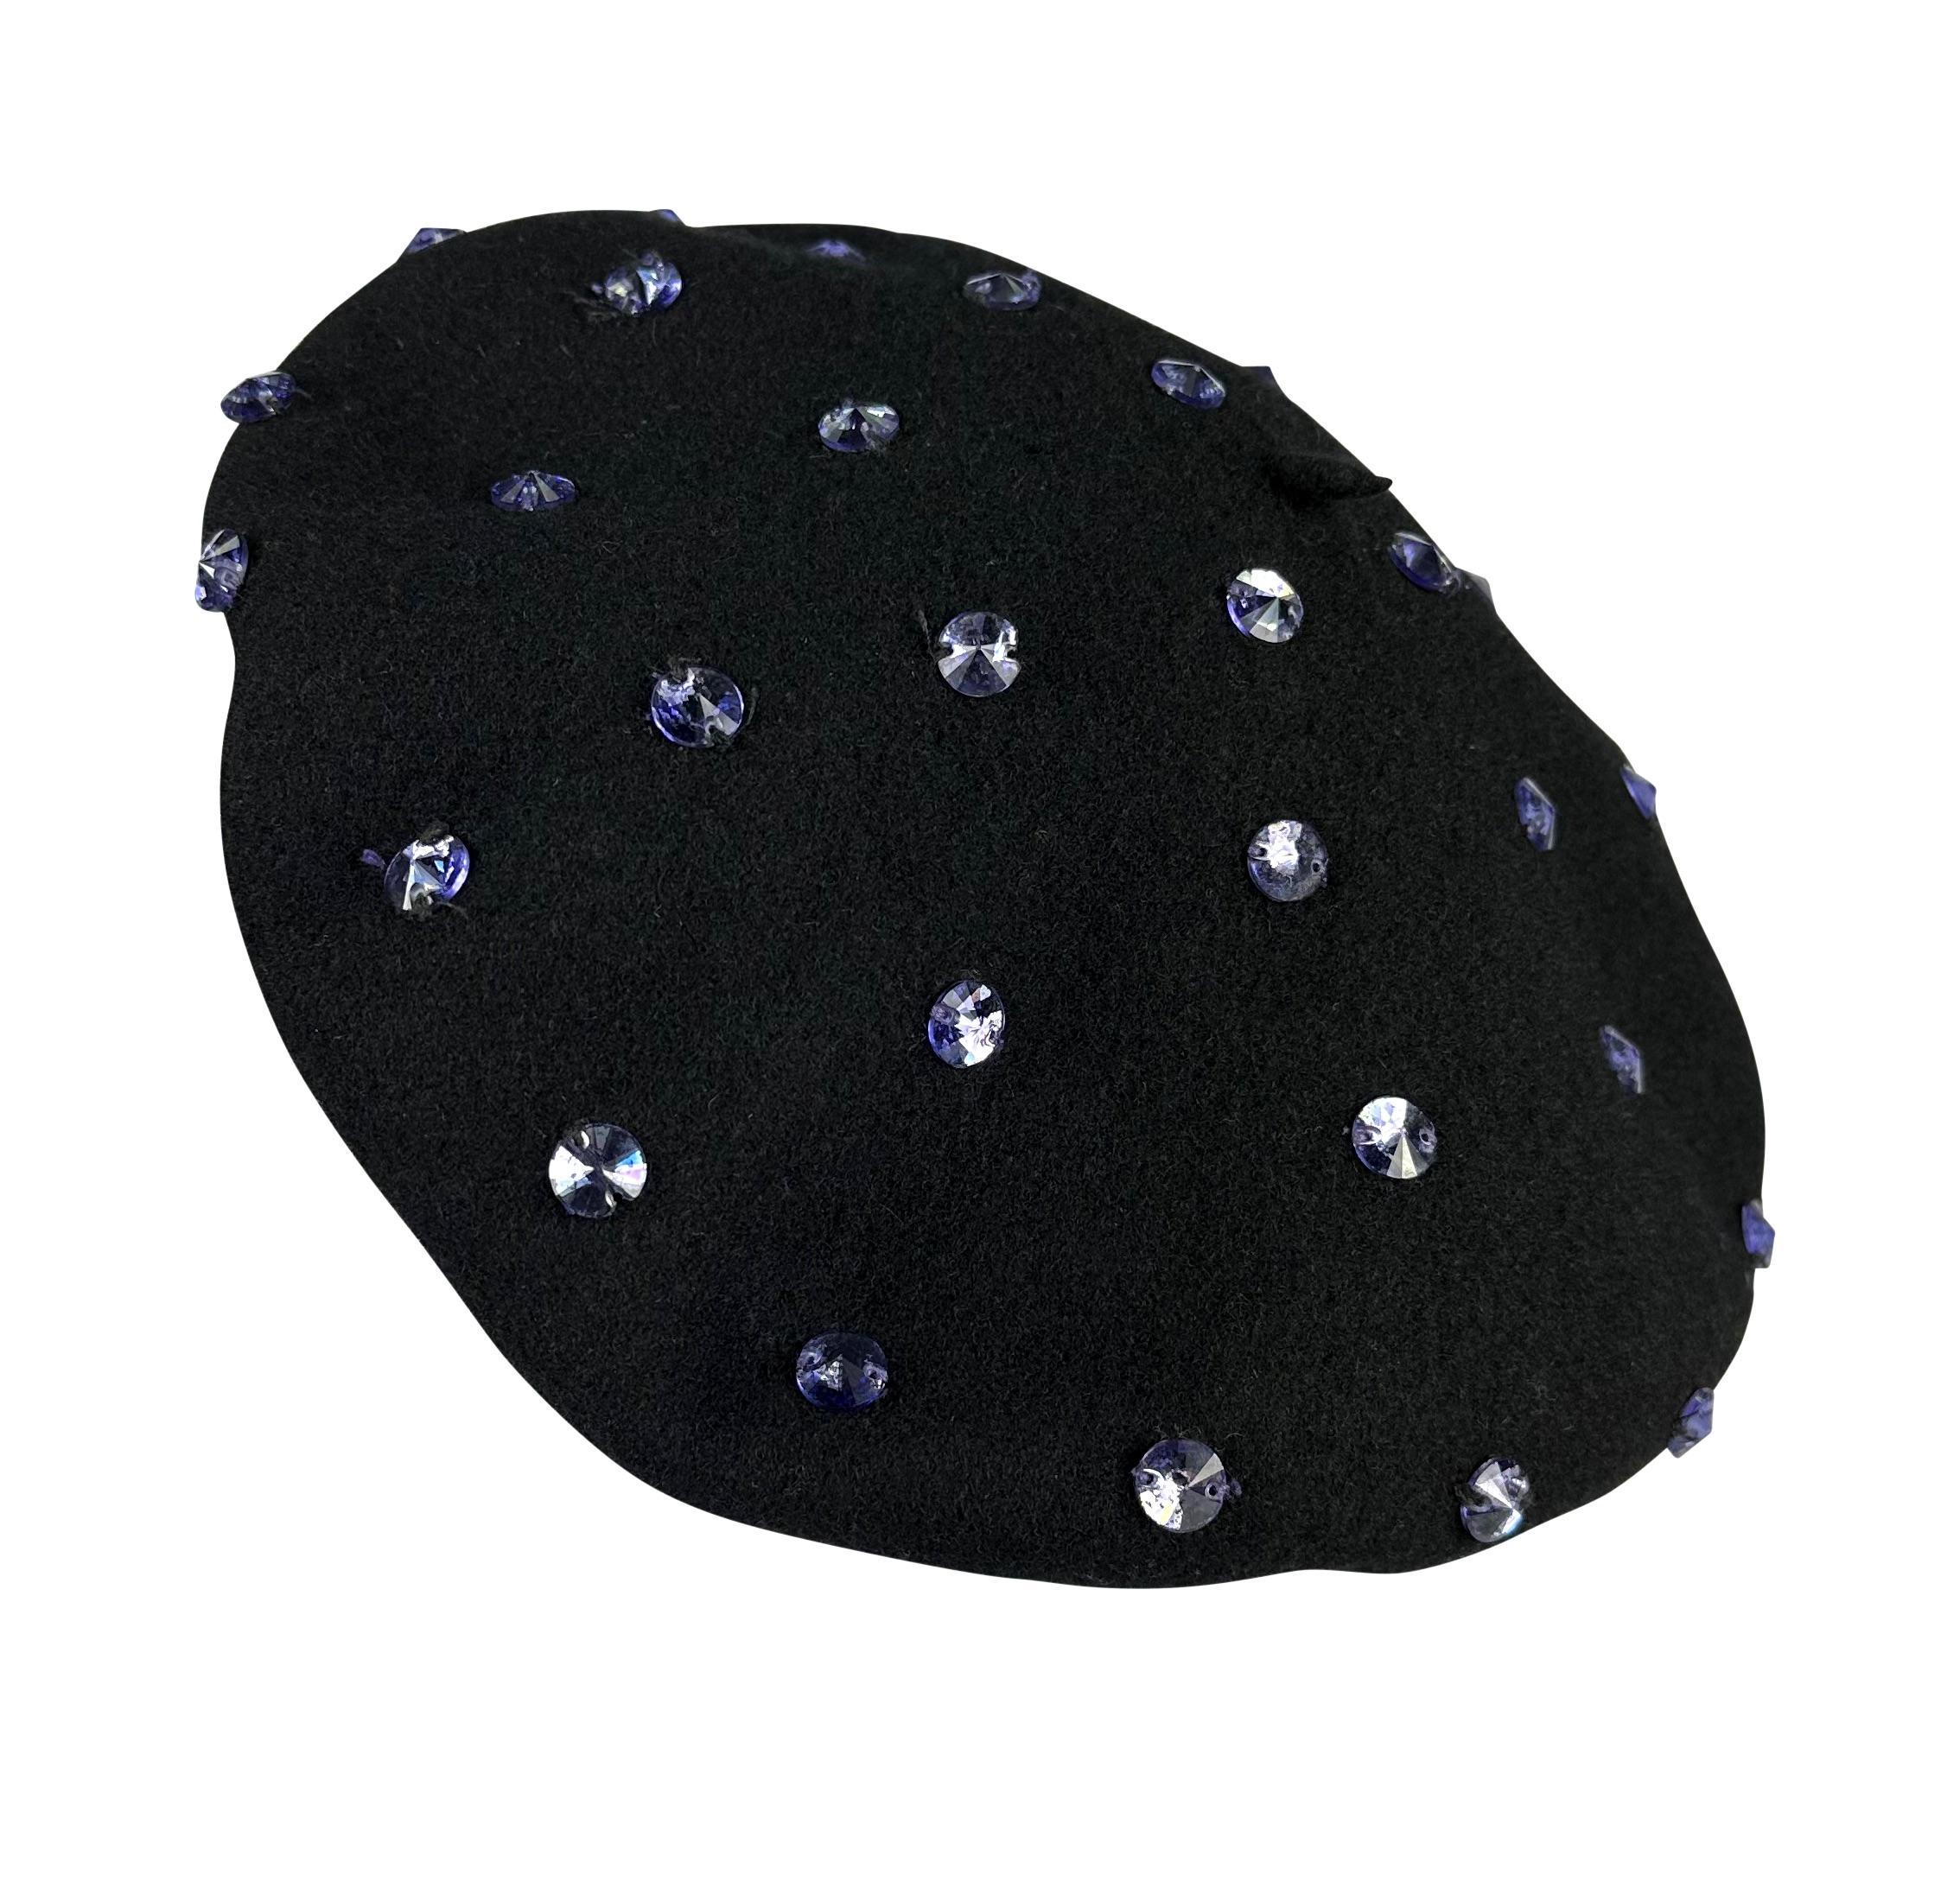 F/W 2000 Dolce & Gabbana Runway Ad Purple Rhinestone Black Beret Hat In Good Condition For Sale In West Hollywood, CA